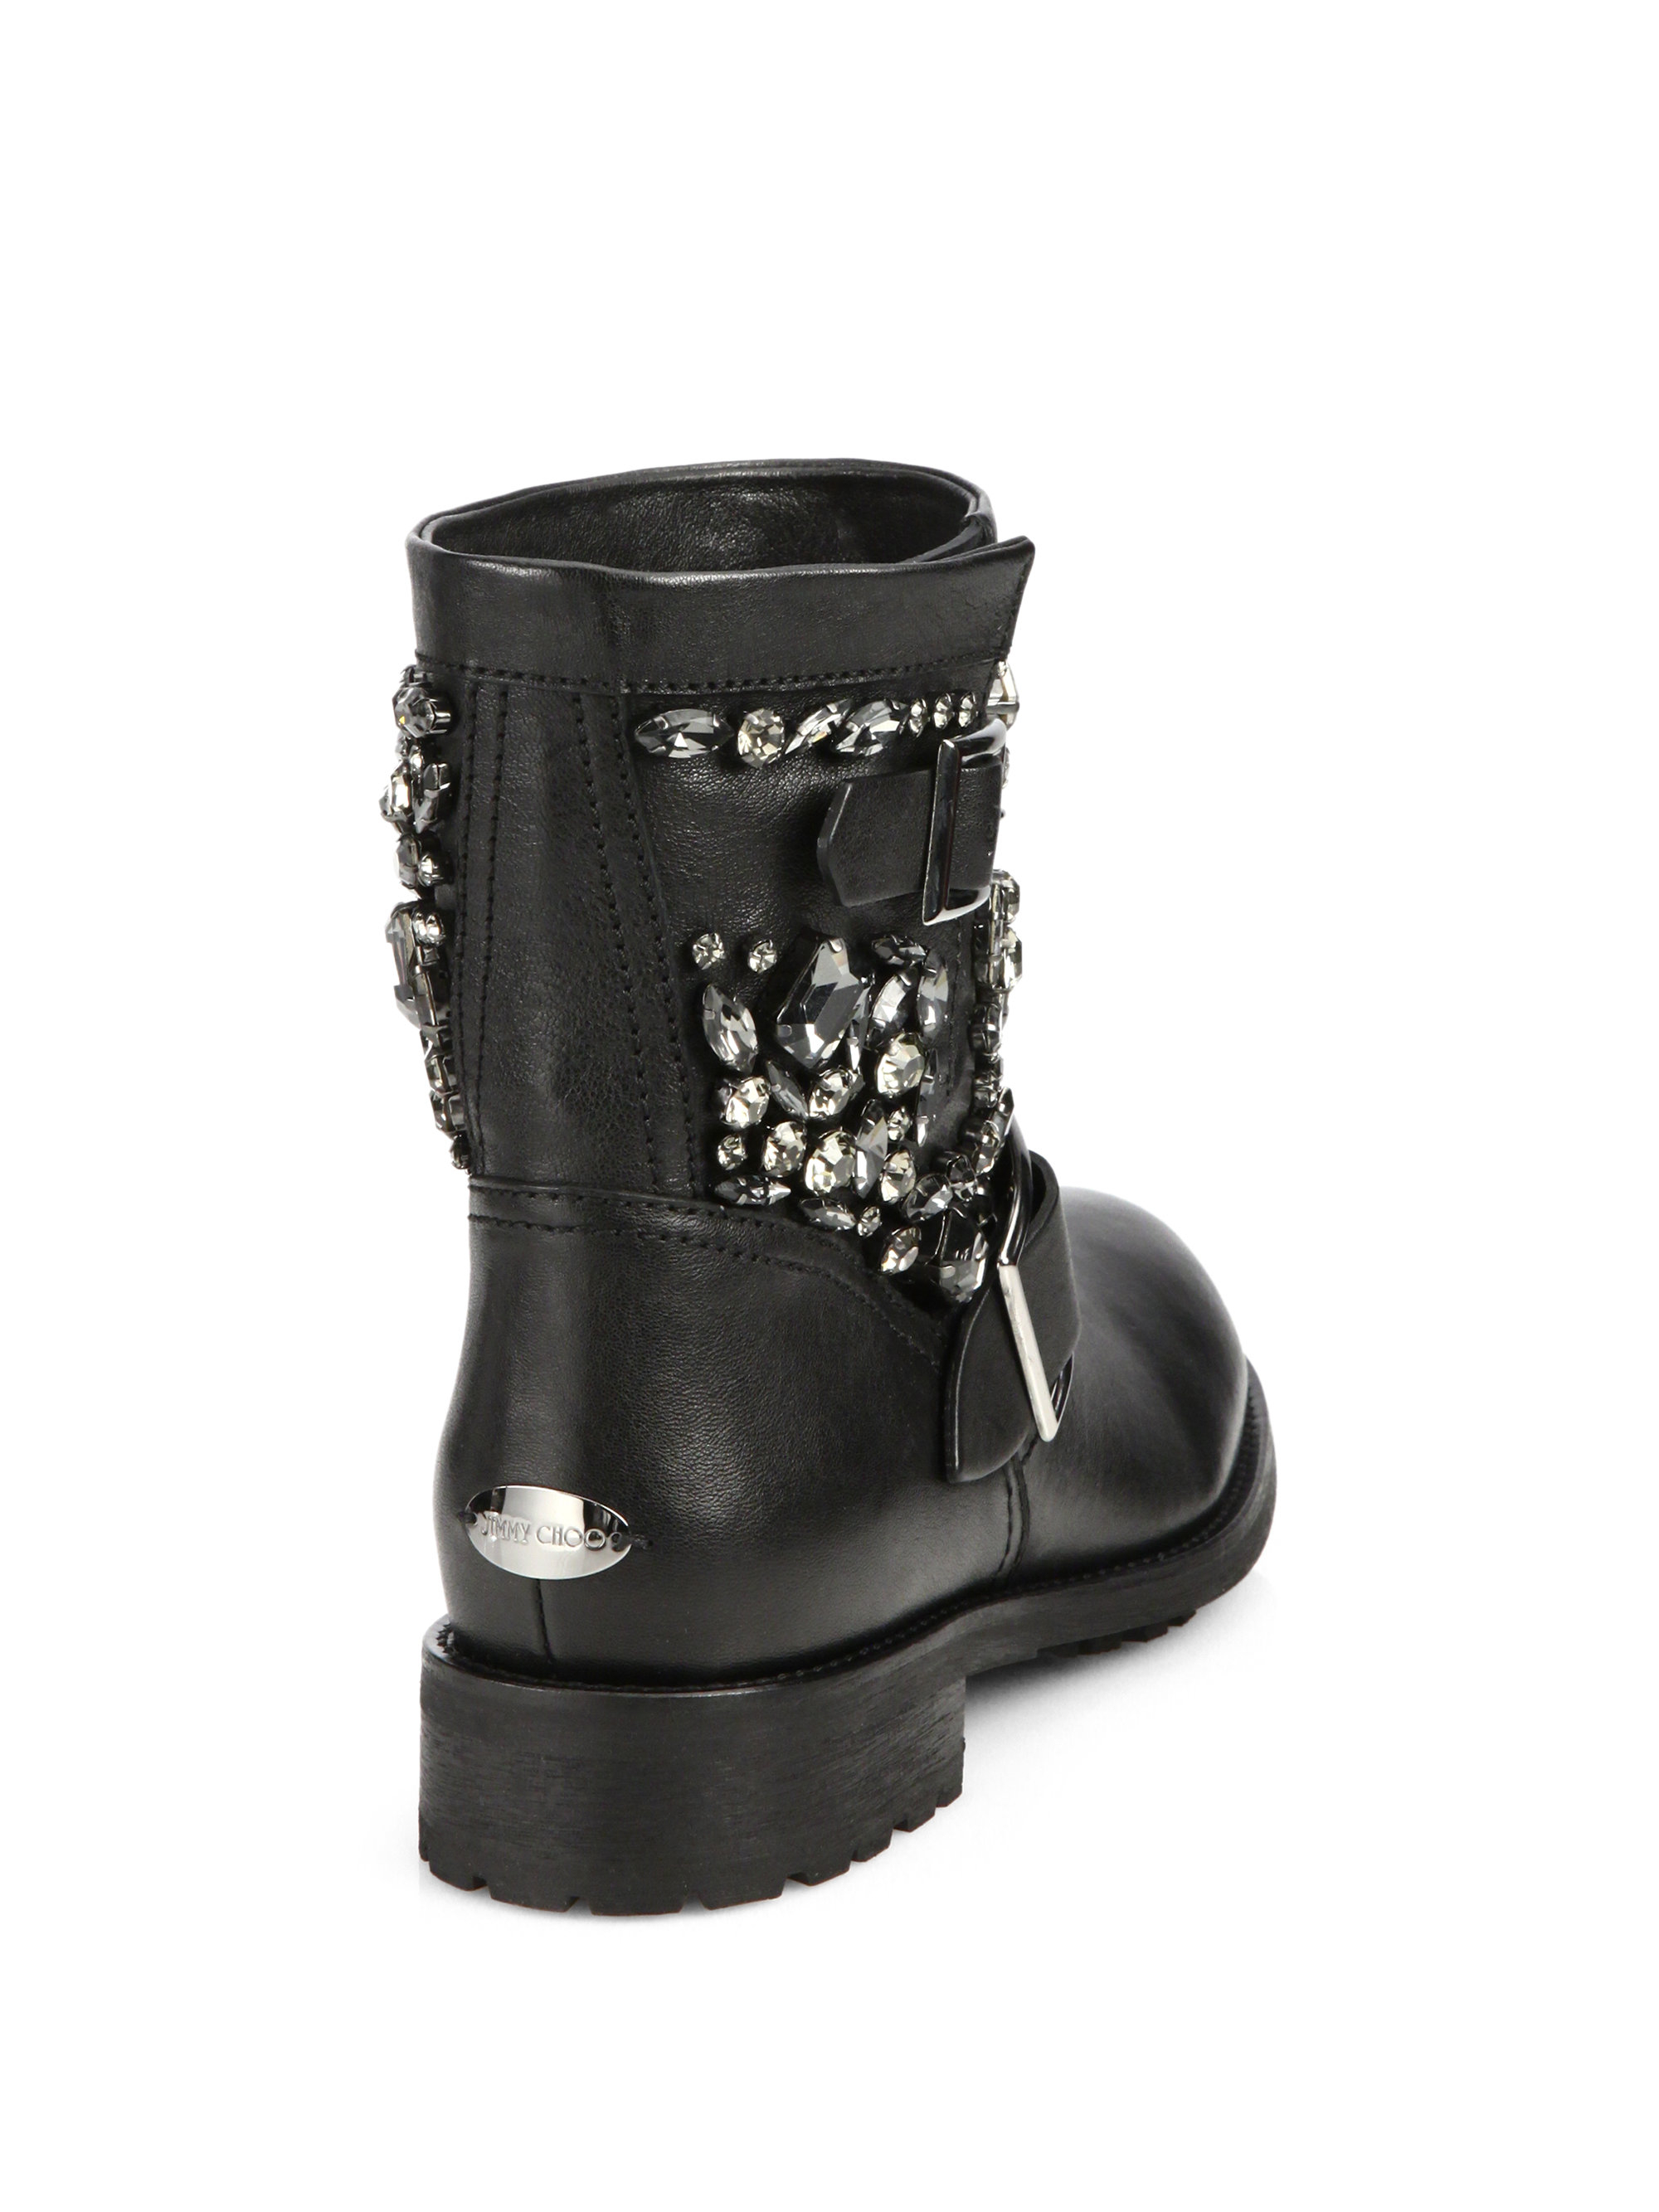 Lyst - Jimmy Choo Crystal-studded Leather Biker Boots in Black